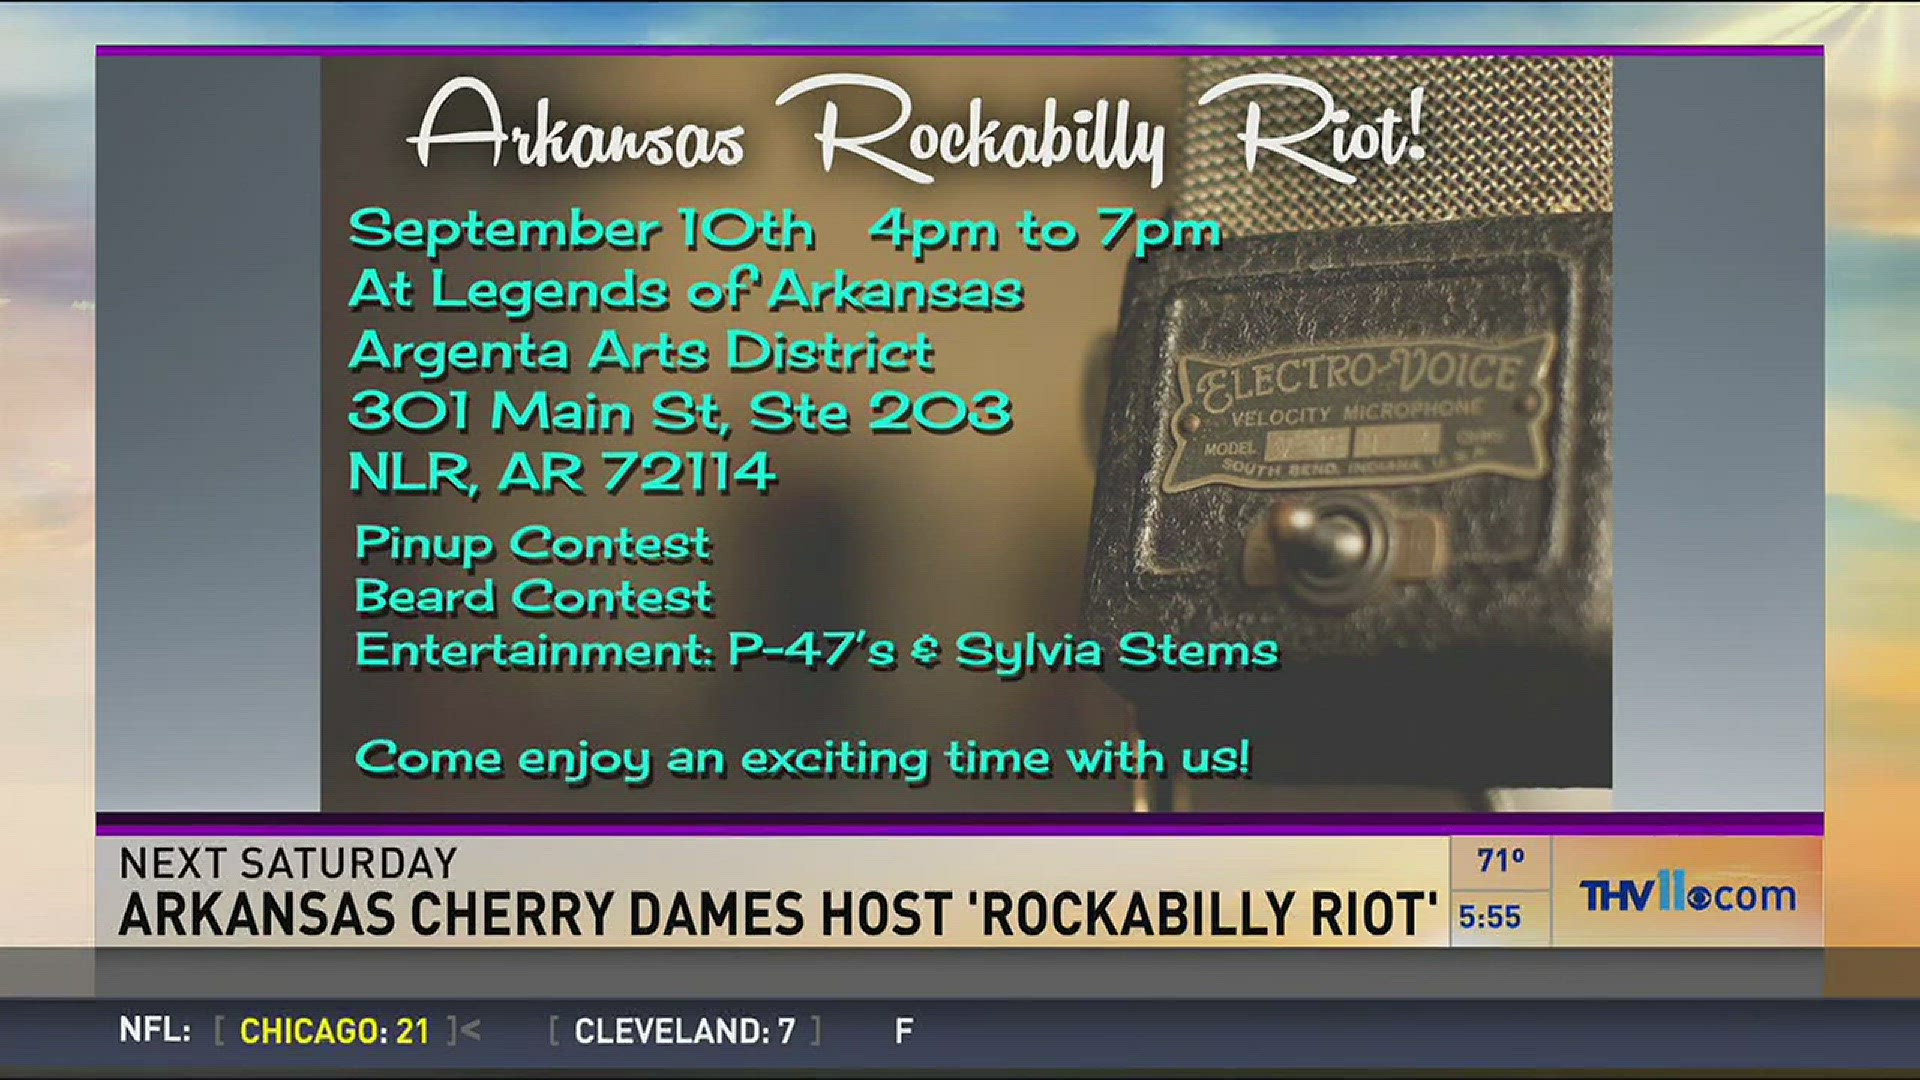 Jessica Wade, Antoinette Bunting and Heather Kueker with the Arkansas Cherry Dames, the hosts of the 2016 Rockabilly Riot visited THV This Morning to tell us more about the event